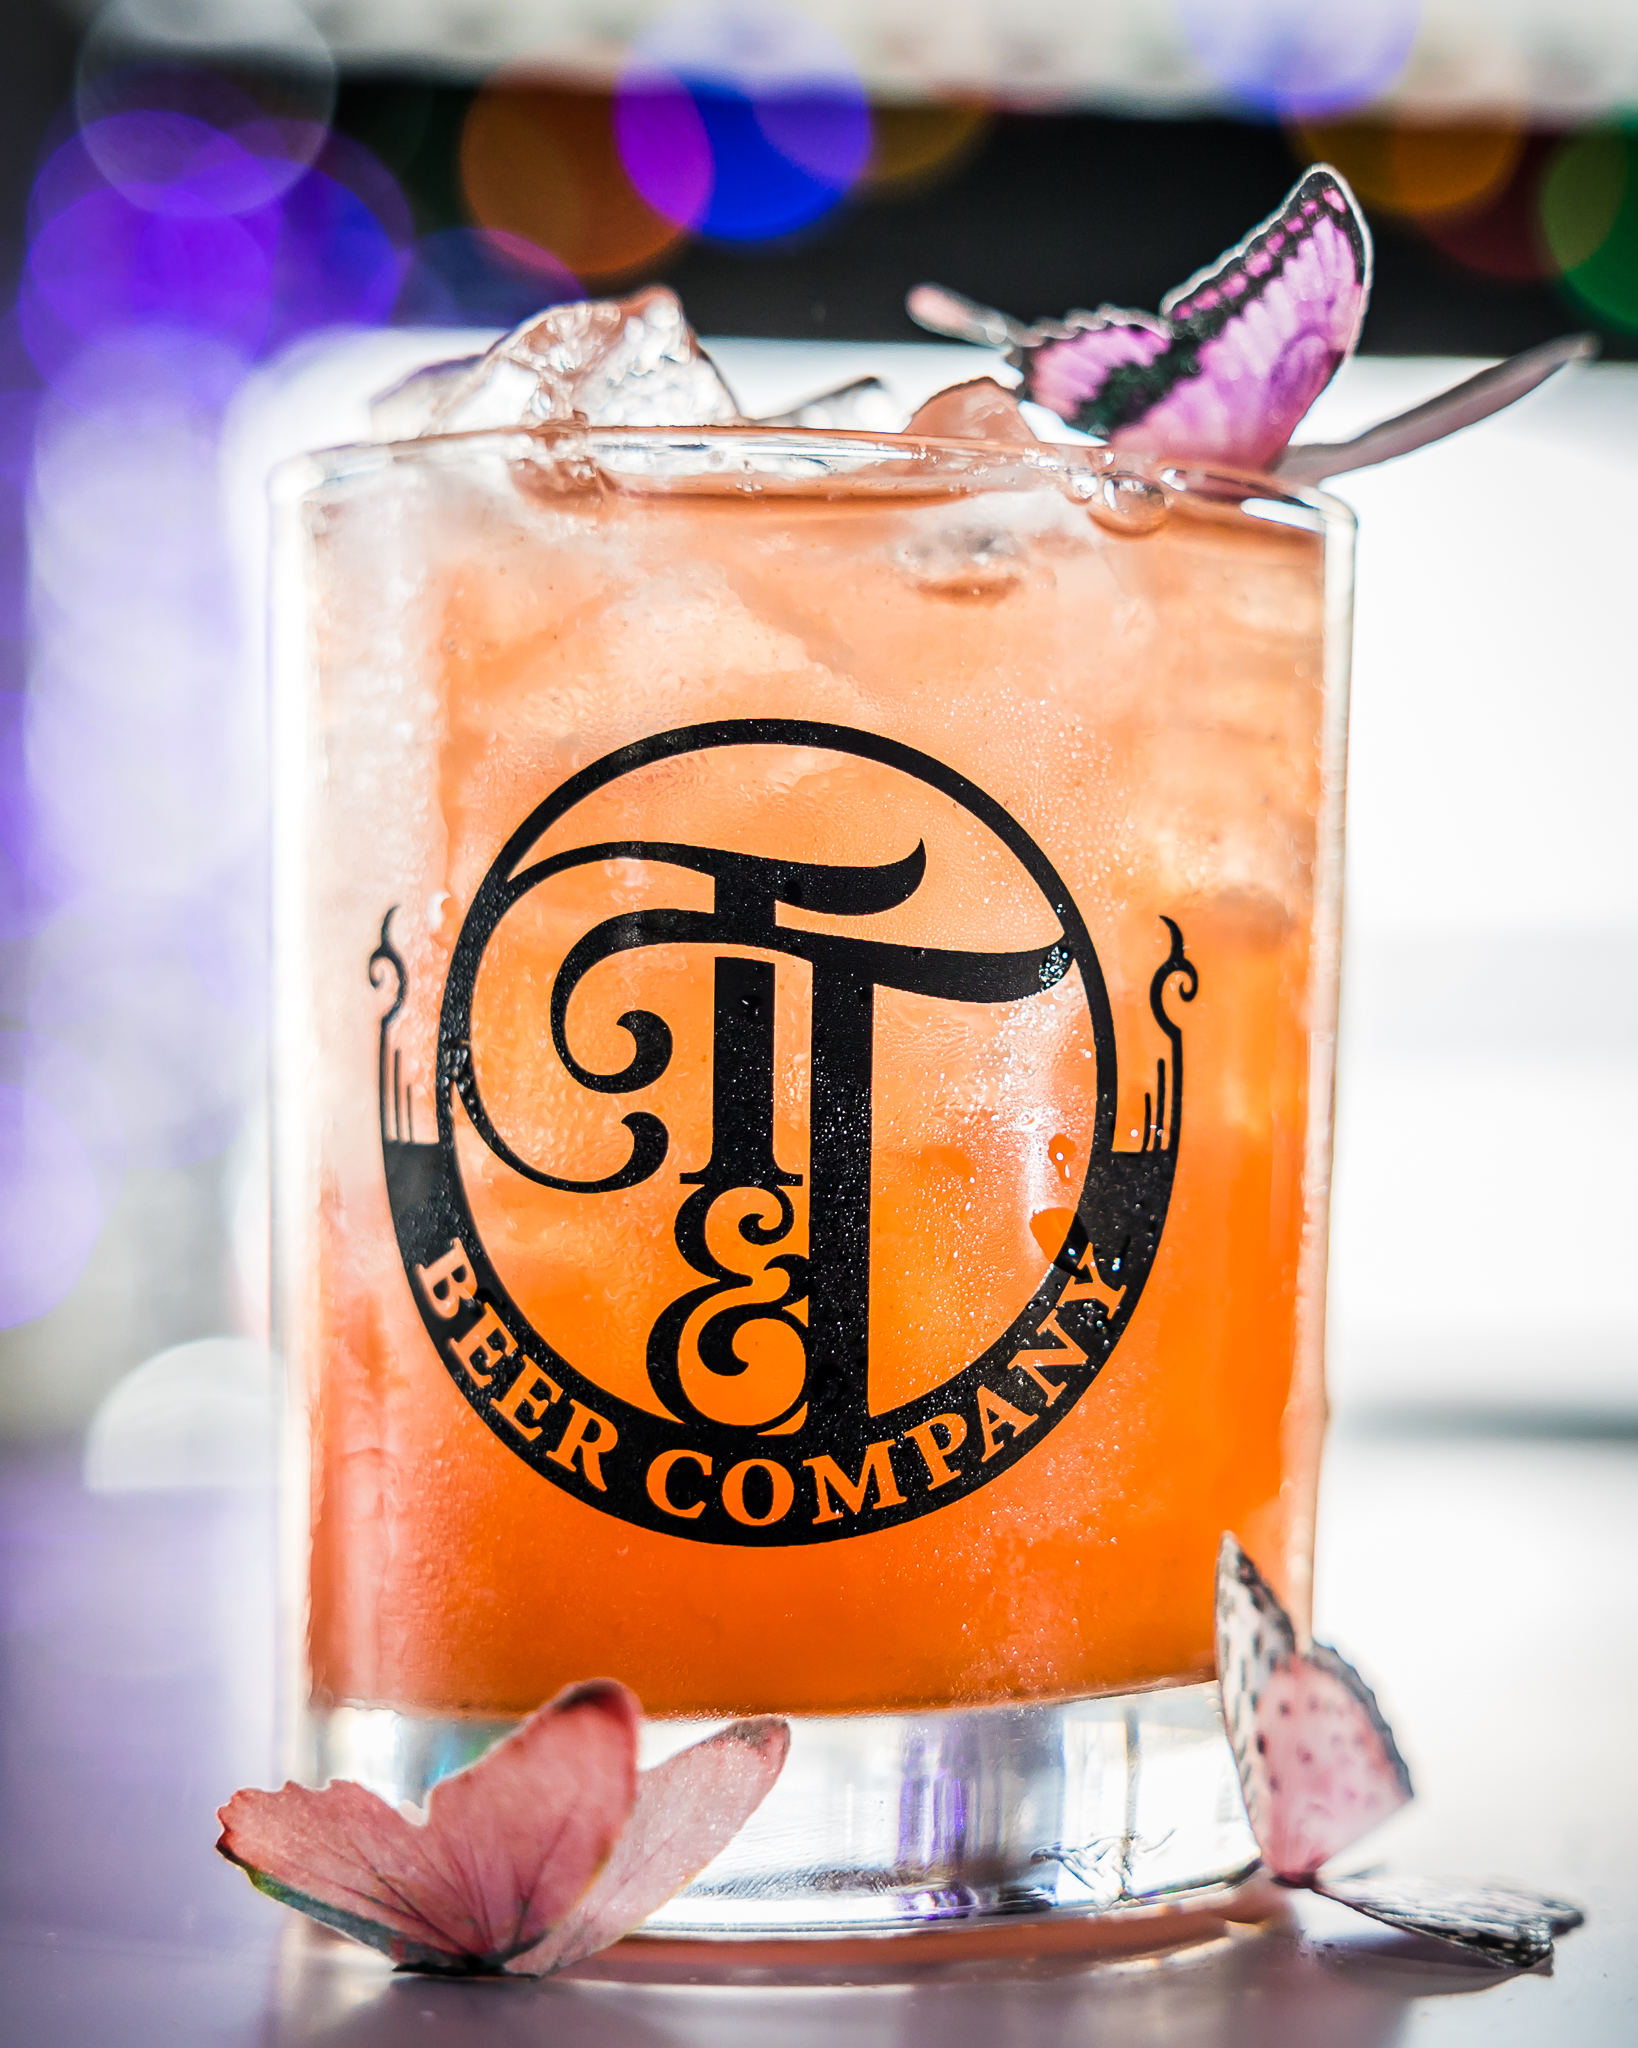 A coral-colored cocktail in a glass with the Tie & Timber Beer Co. logo printed on the side. Three decorative butterflies are posed  next to the glass